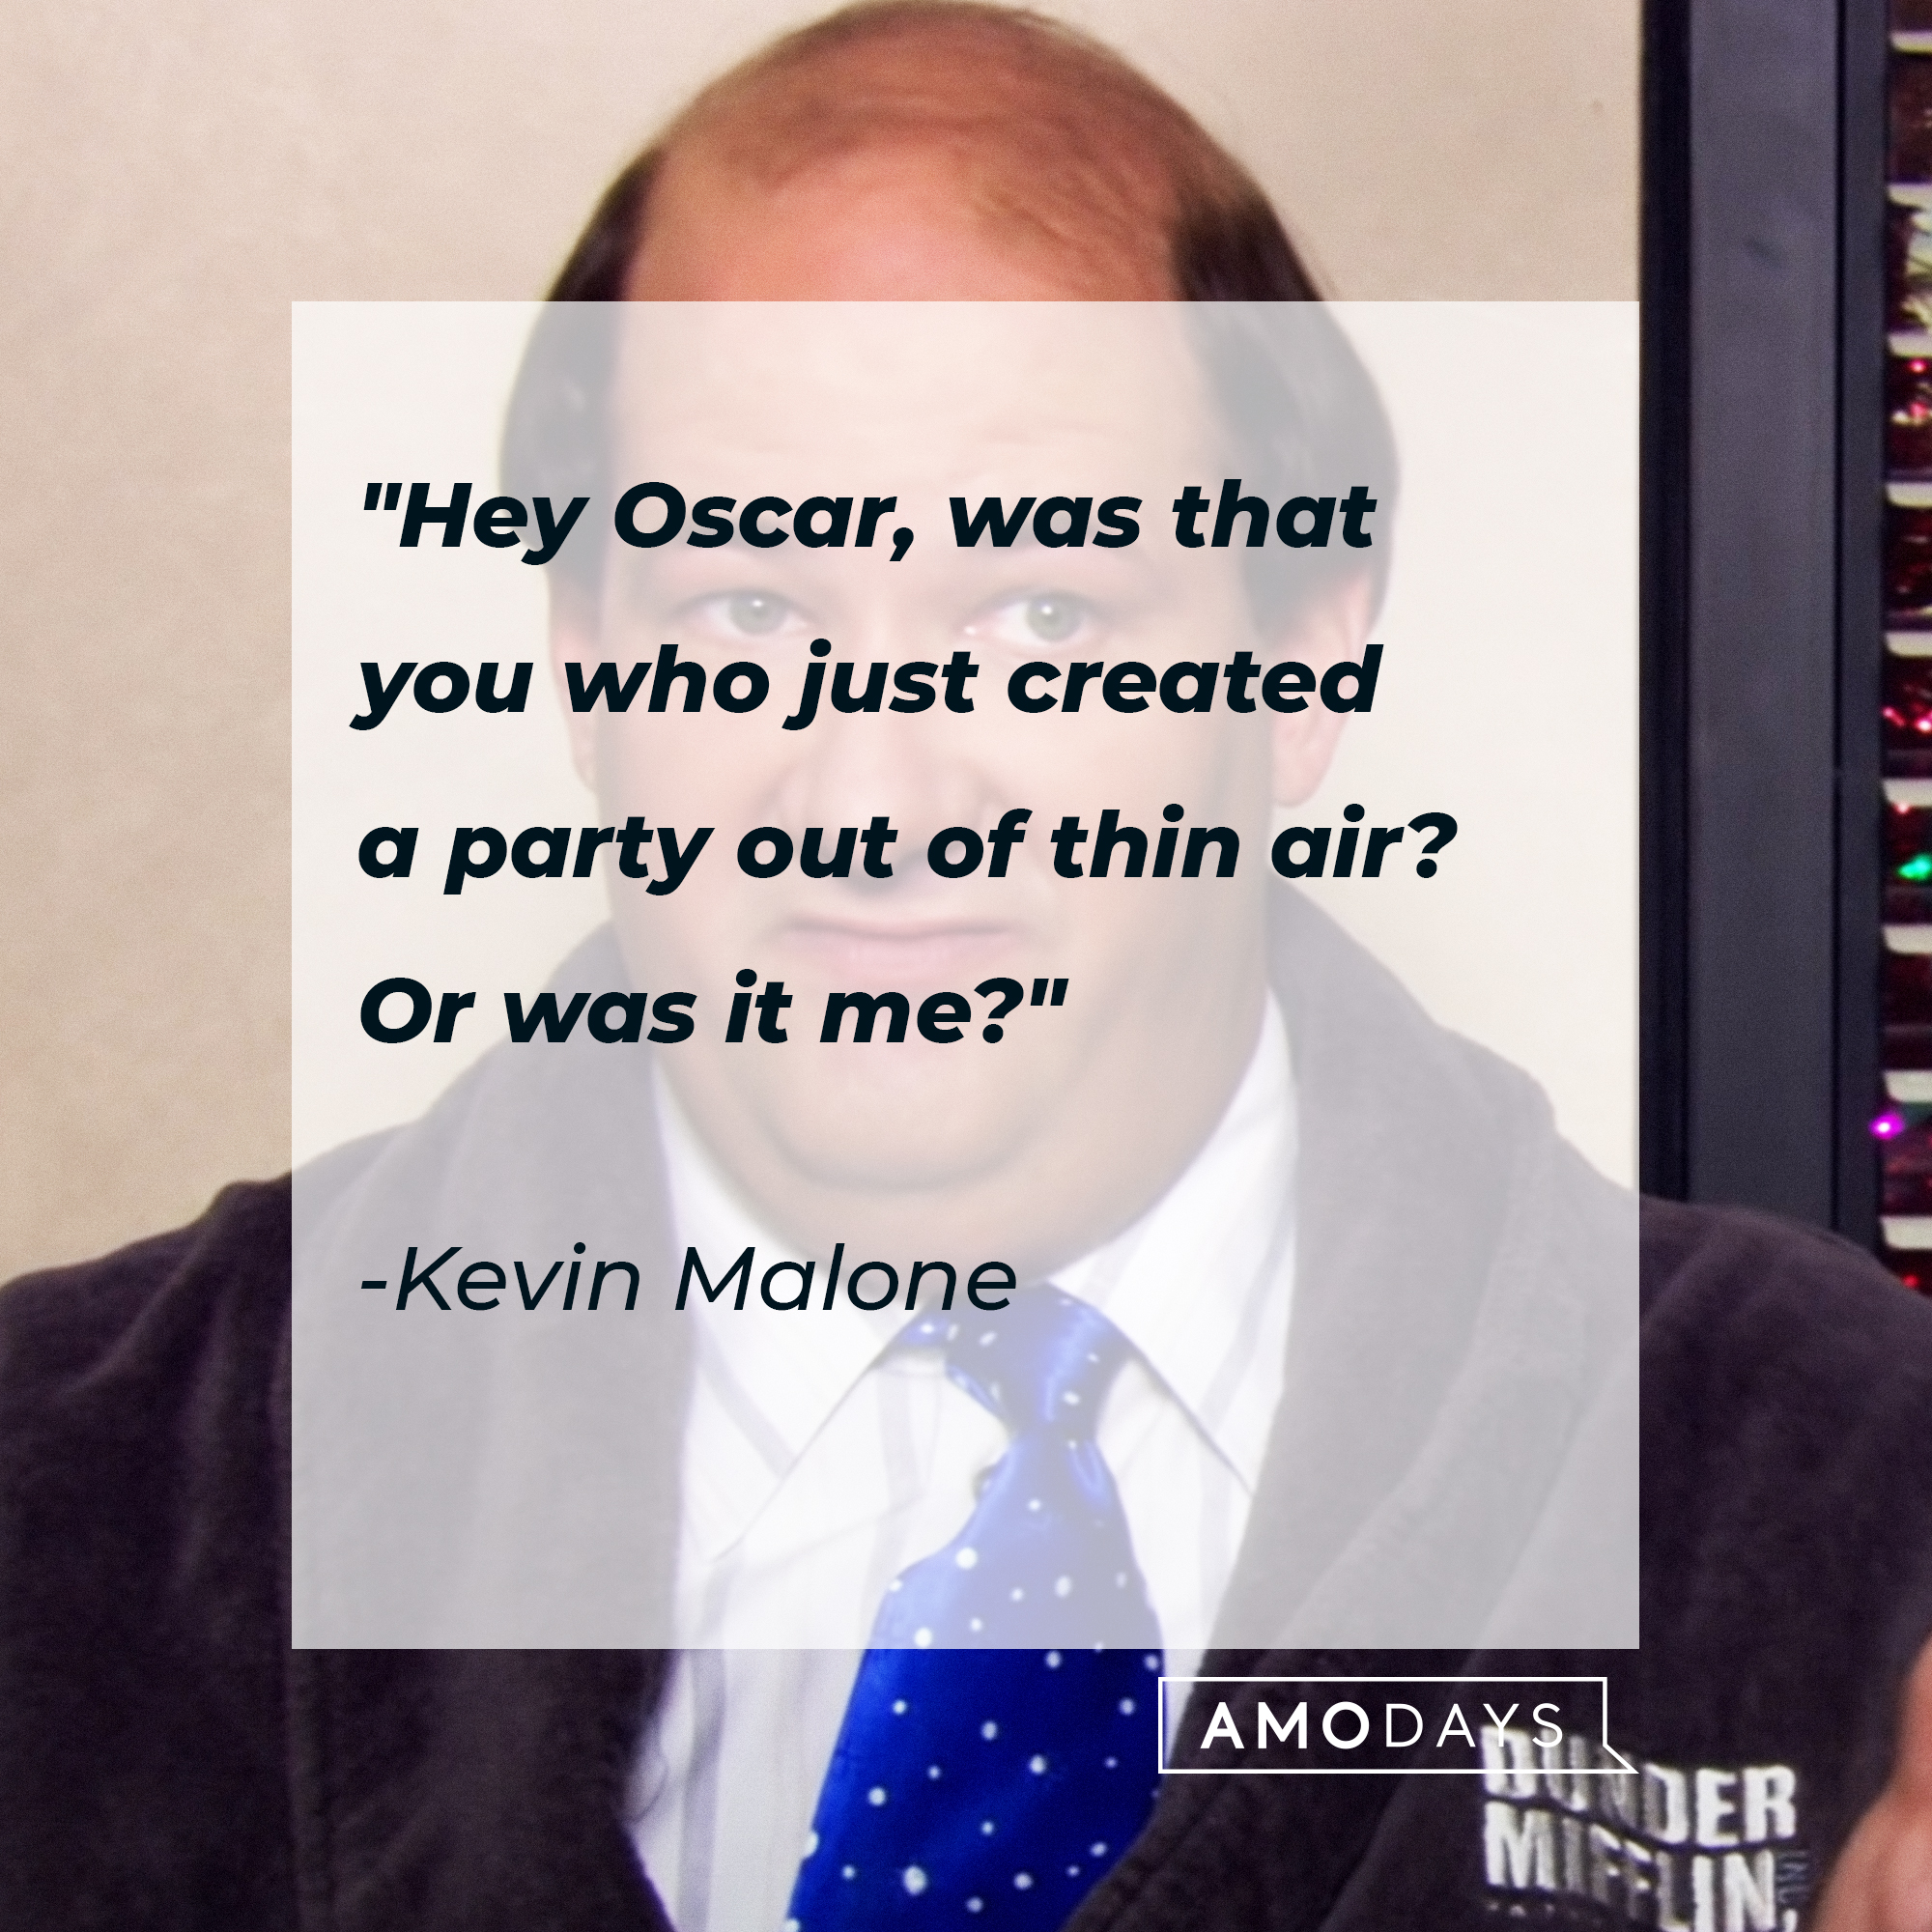 An image of Kevin Malone, with his quote: "Hey Oscar, was that you who just created a party out of thin air? Or was it me?" | Source: Youtube.com/The Office